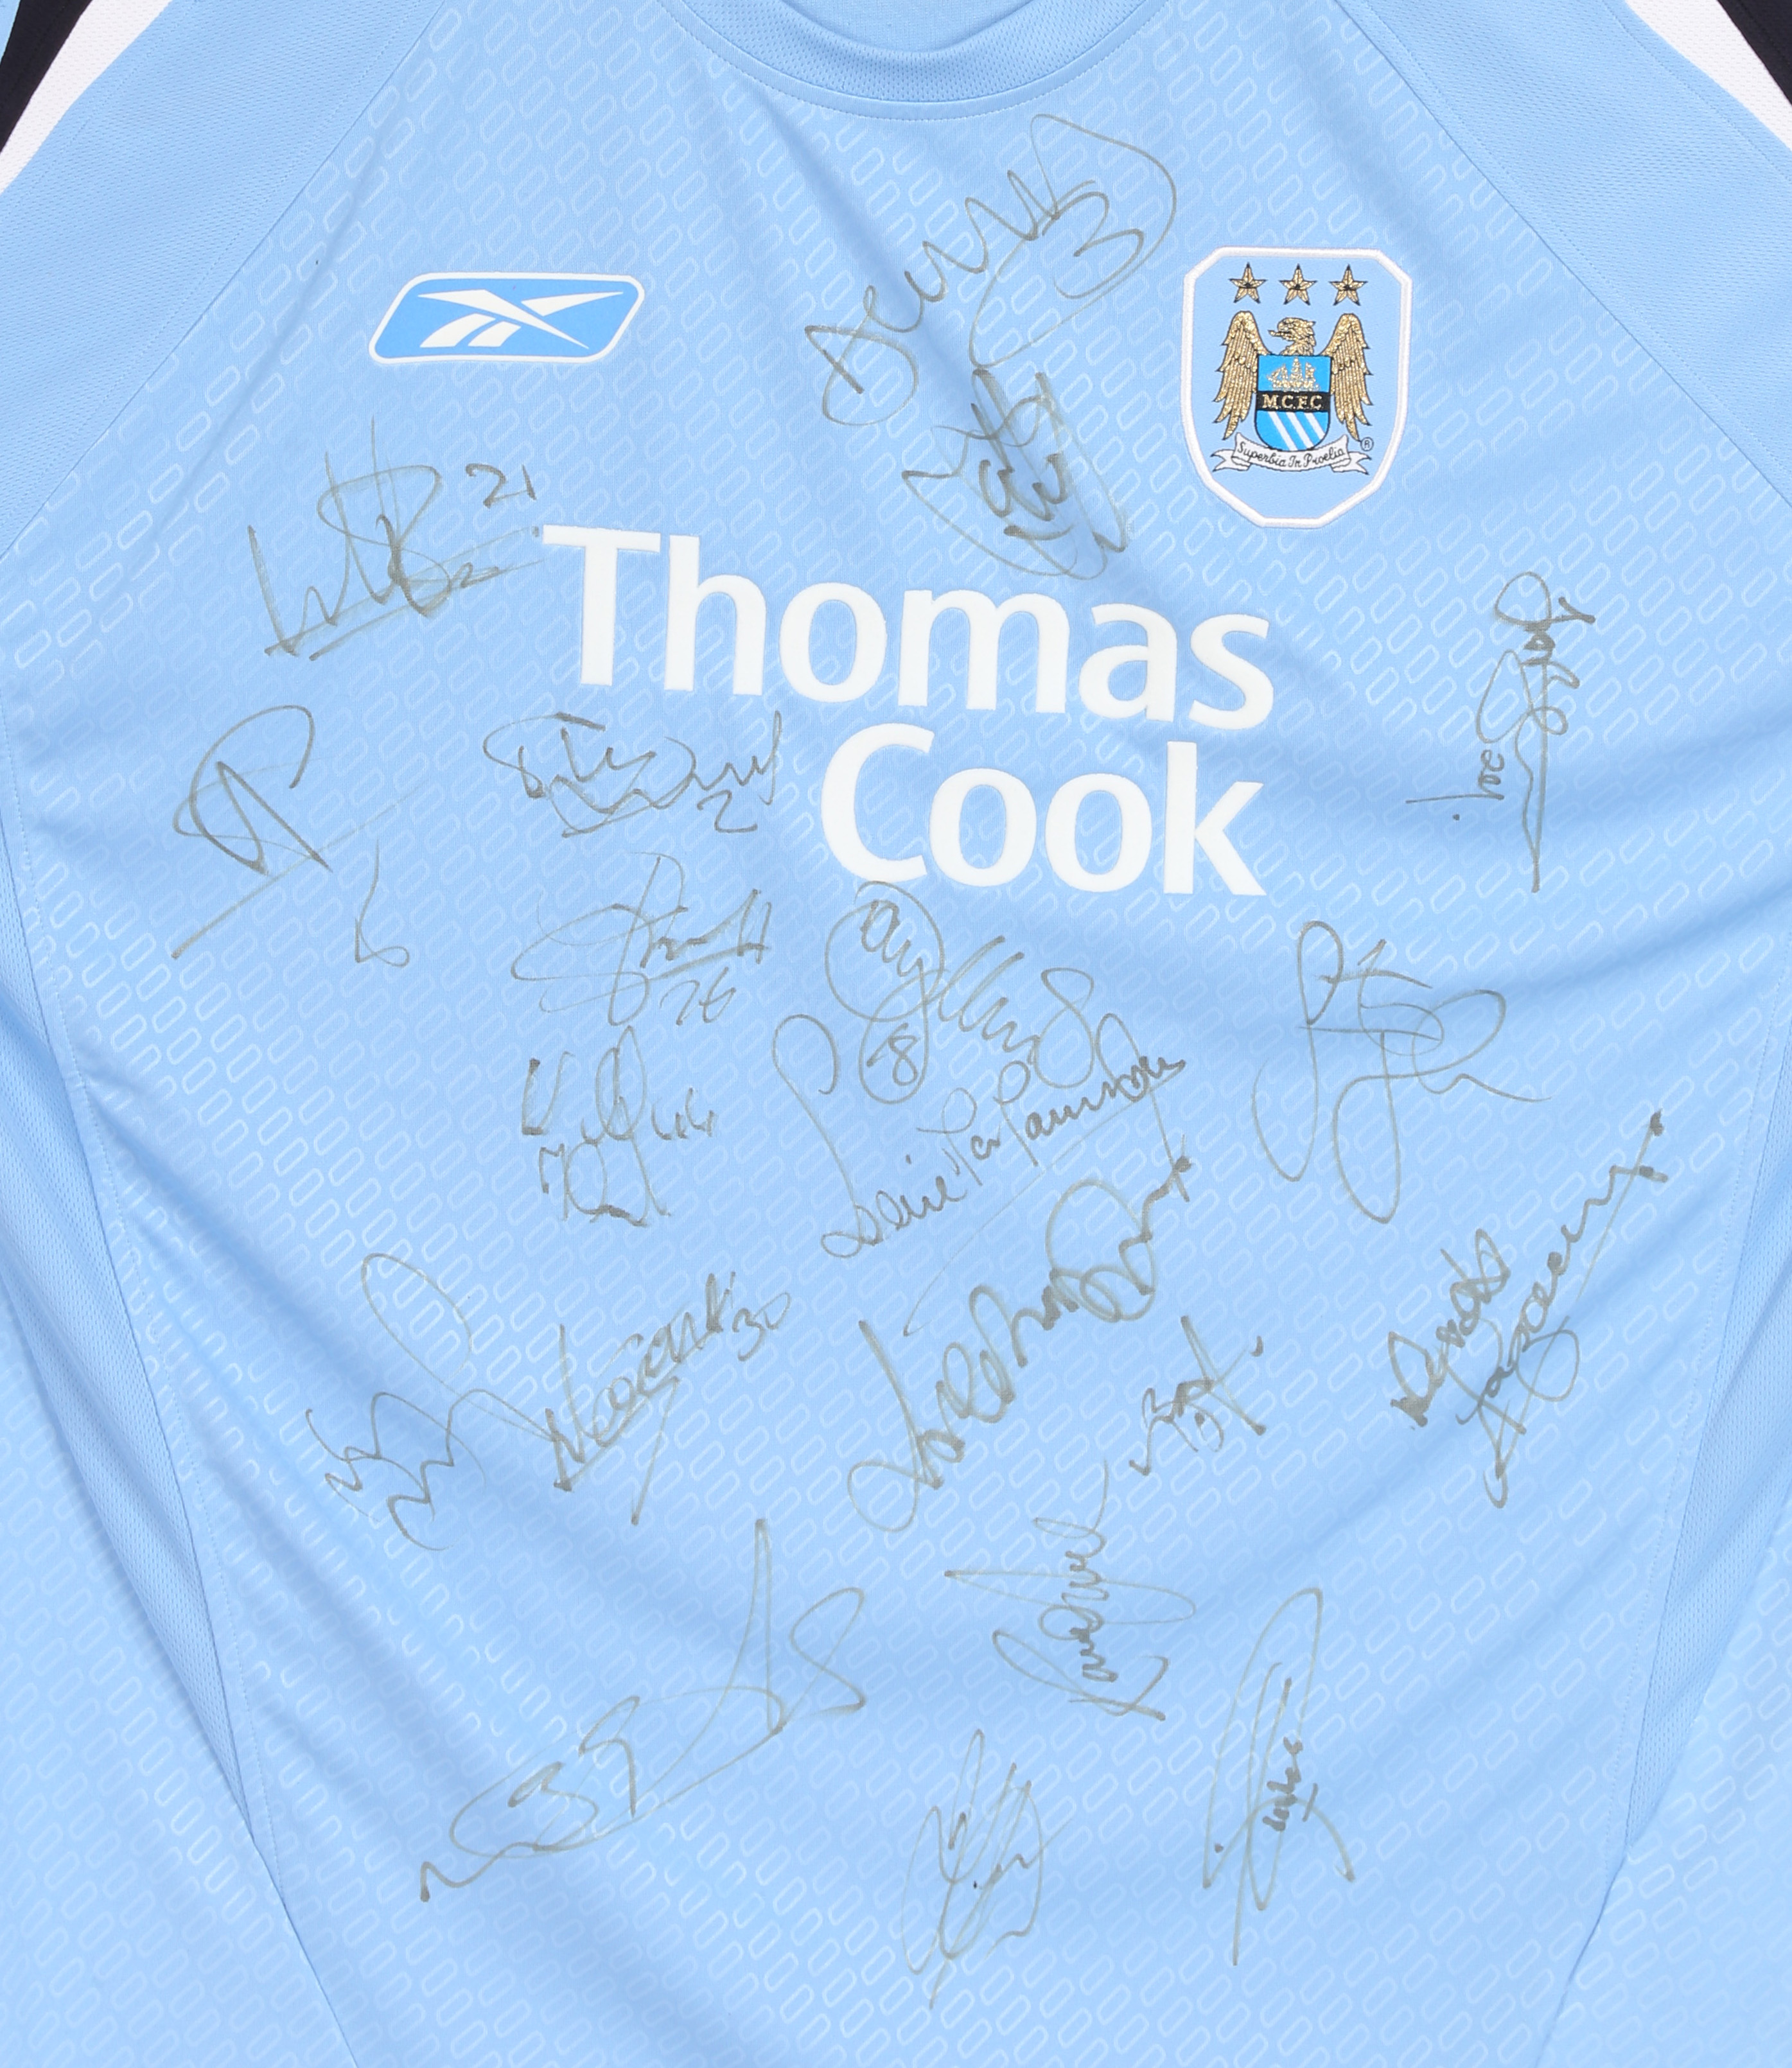 Manchester City F.C. 2004/05 Home shirt (UK L) autographed by Robbie Fowler, Joey Barton, David